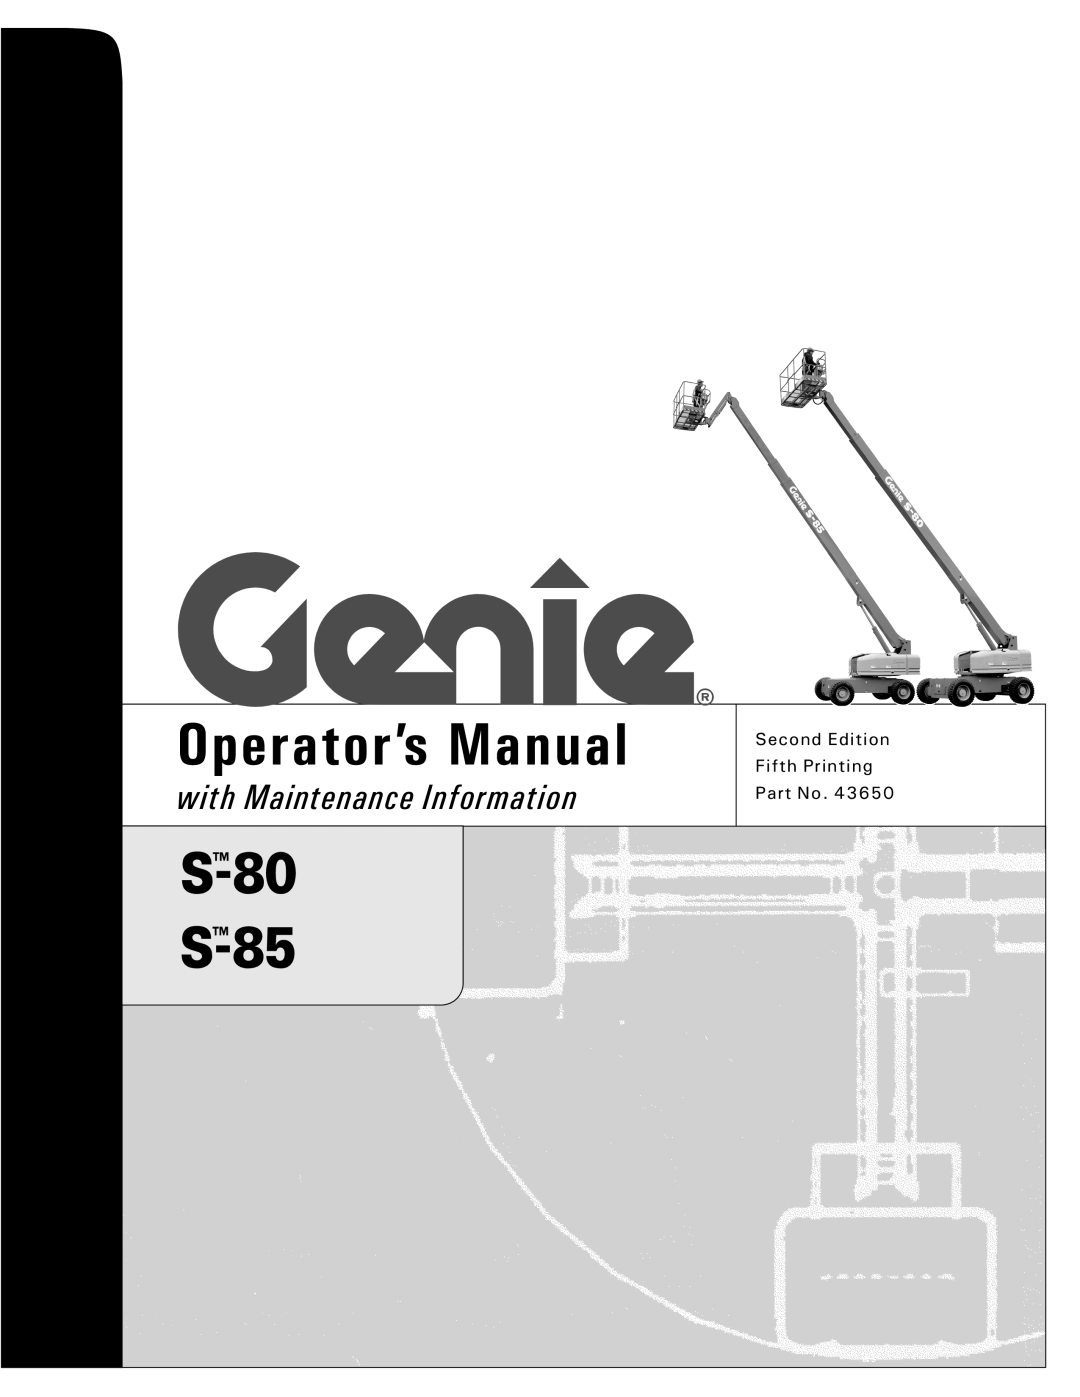 Genie S-85, S-80, 43650 manual Operator’s Manual, with Maintenance Information, Second Edition, Fifth Printing, Part No 